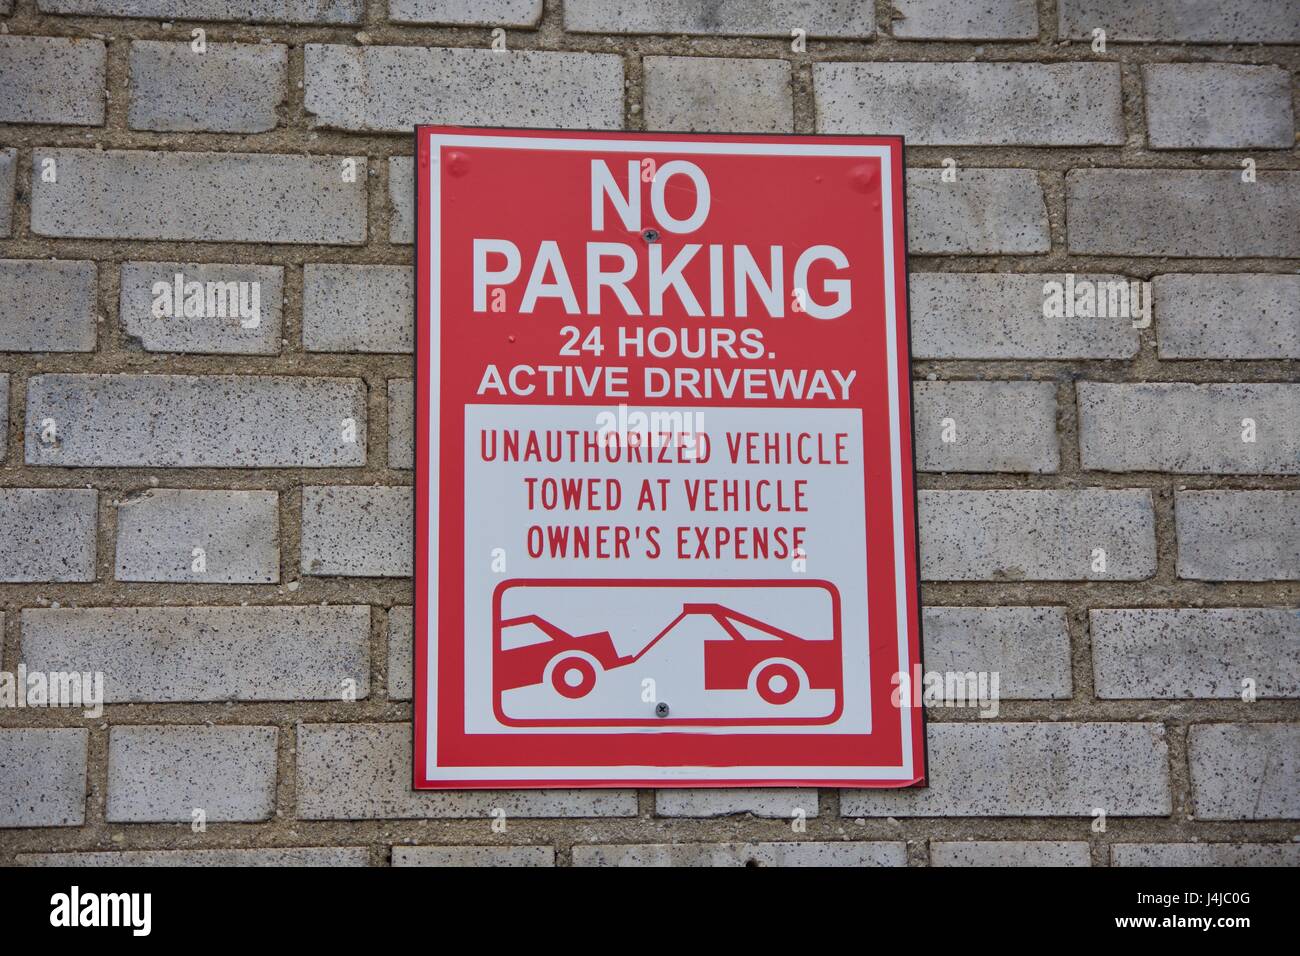 no parking sign tow at expense of owner hanging outside parking garage Stock Photo